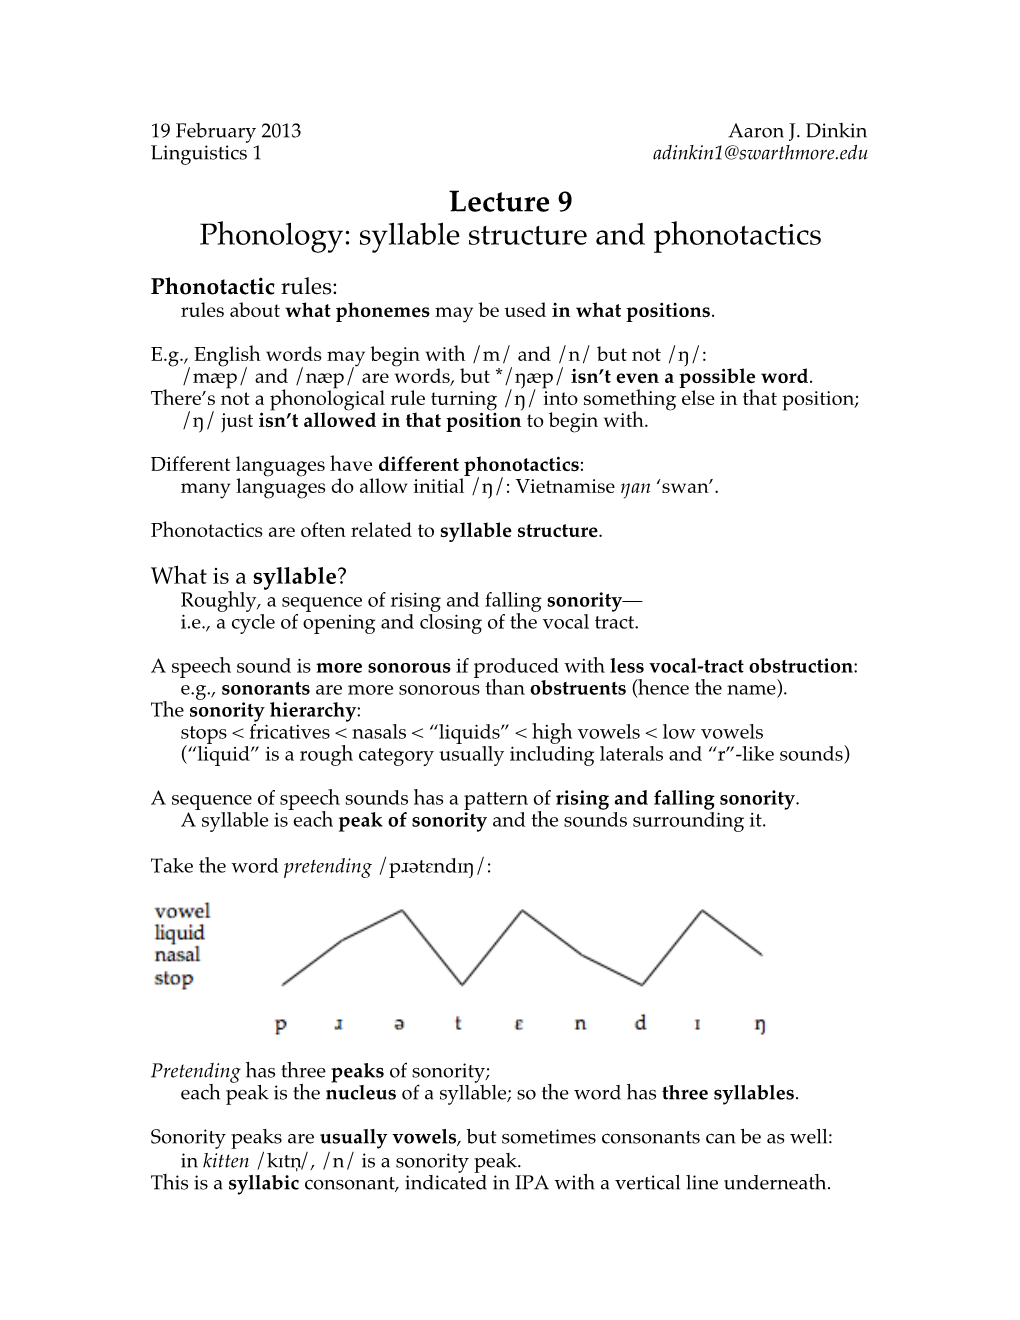 Lecture 9 Phonology: Syllable Structure and Phonotactics